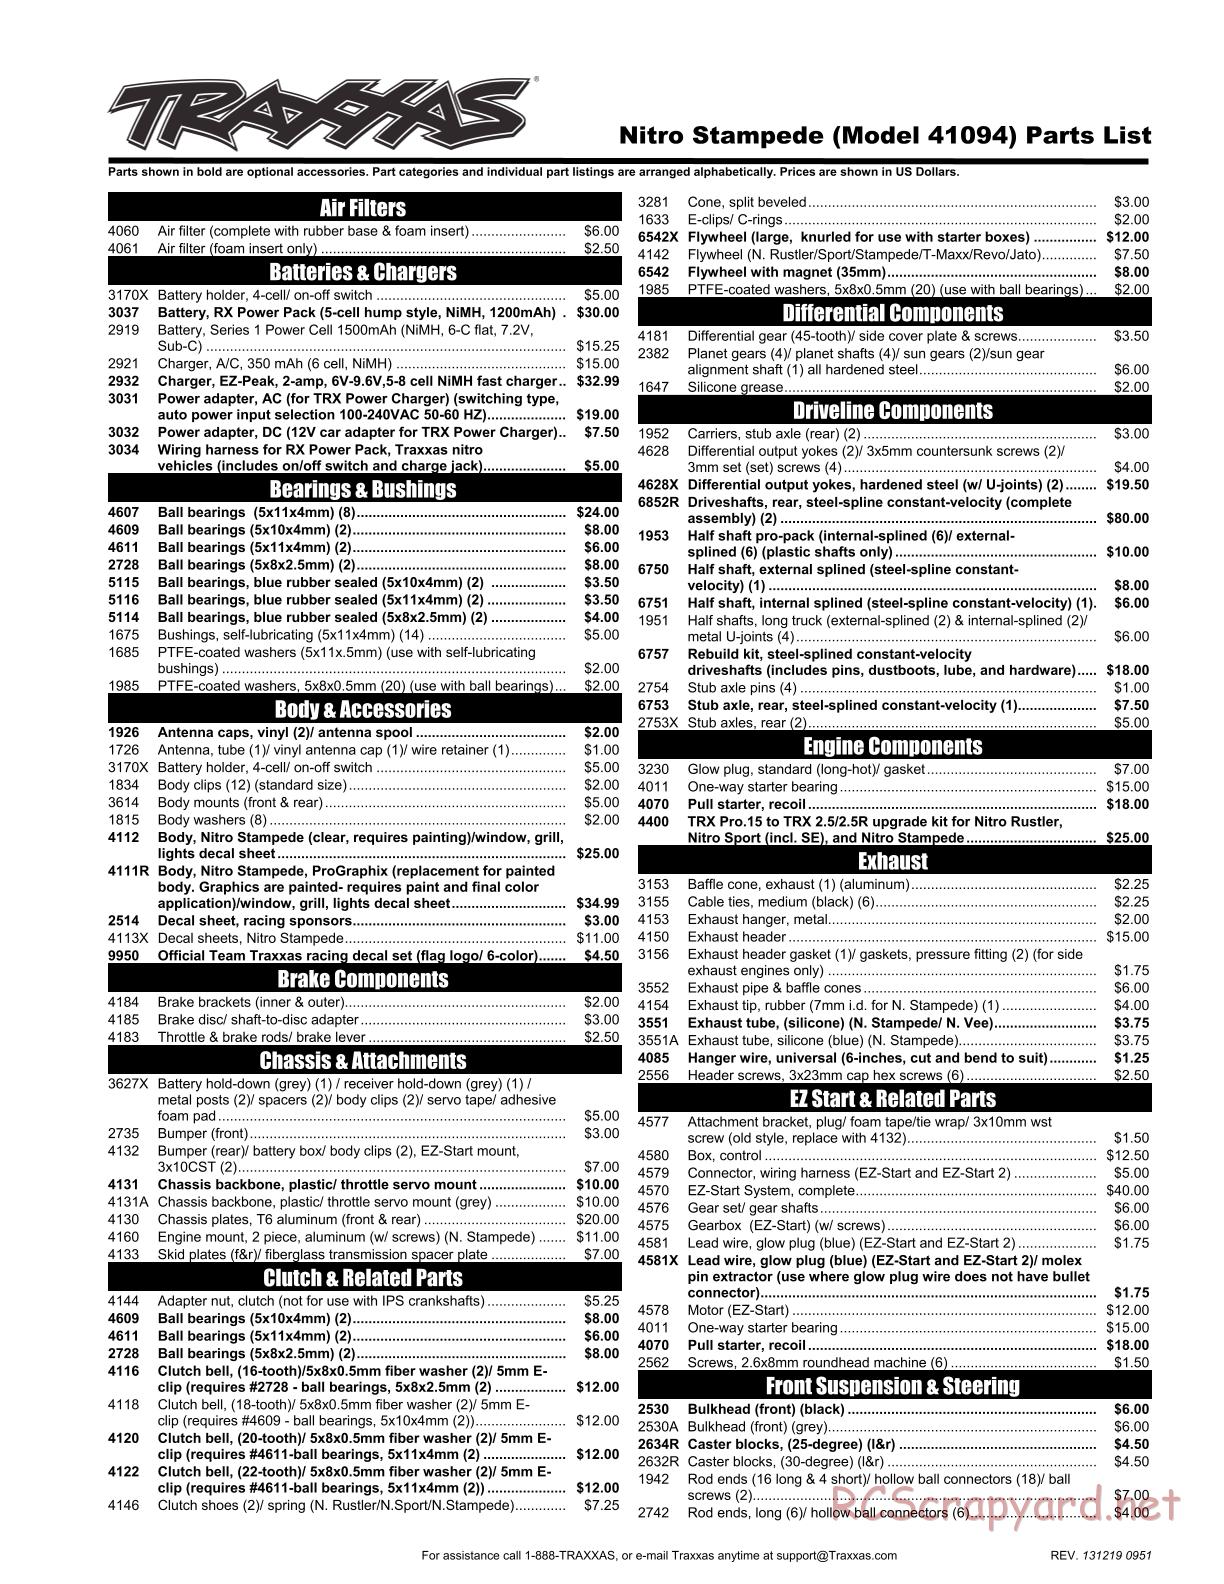 Traxxas - Nitro Stampede (2013) - Parts List - Page 1